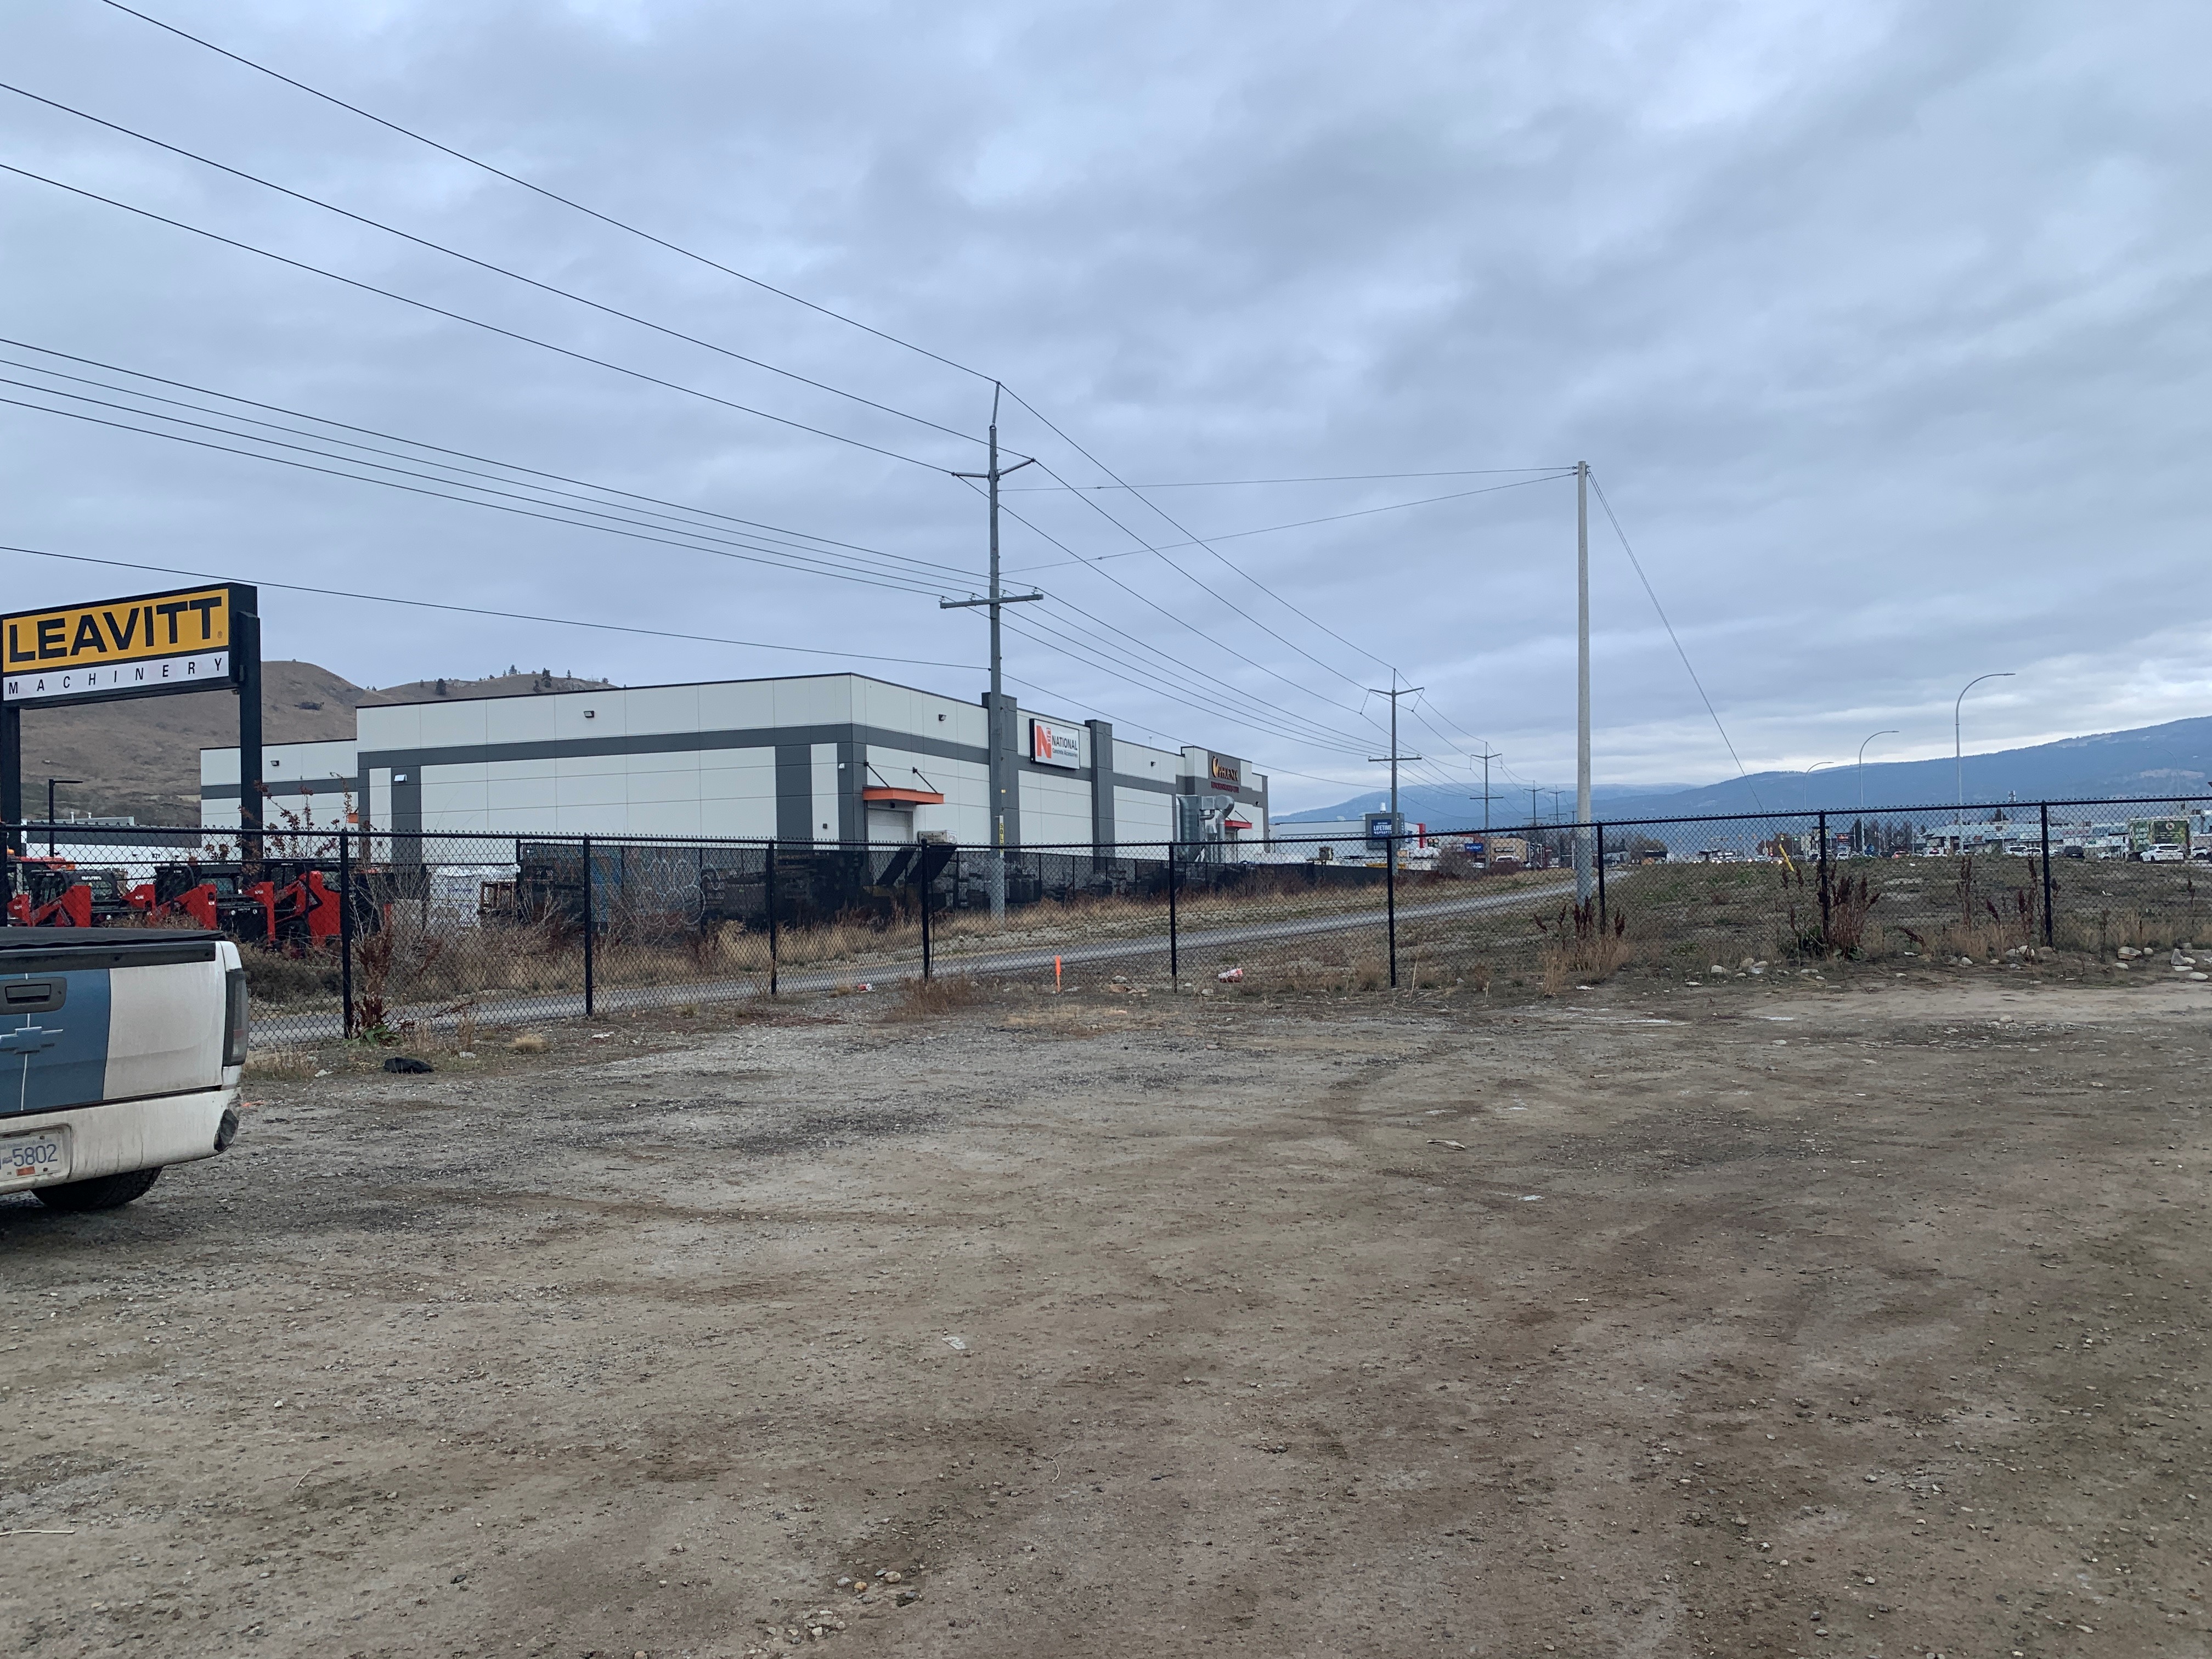 Residents questioning site of new homeless shelters in Kelowna